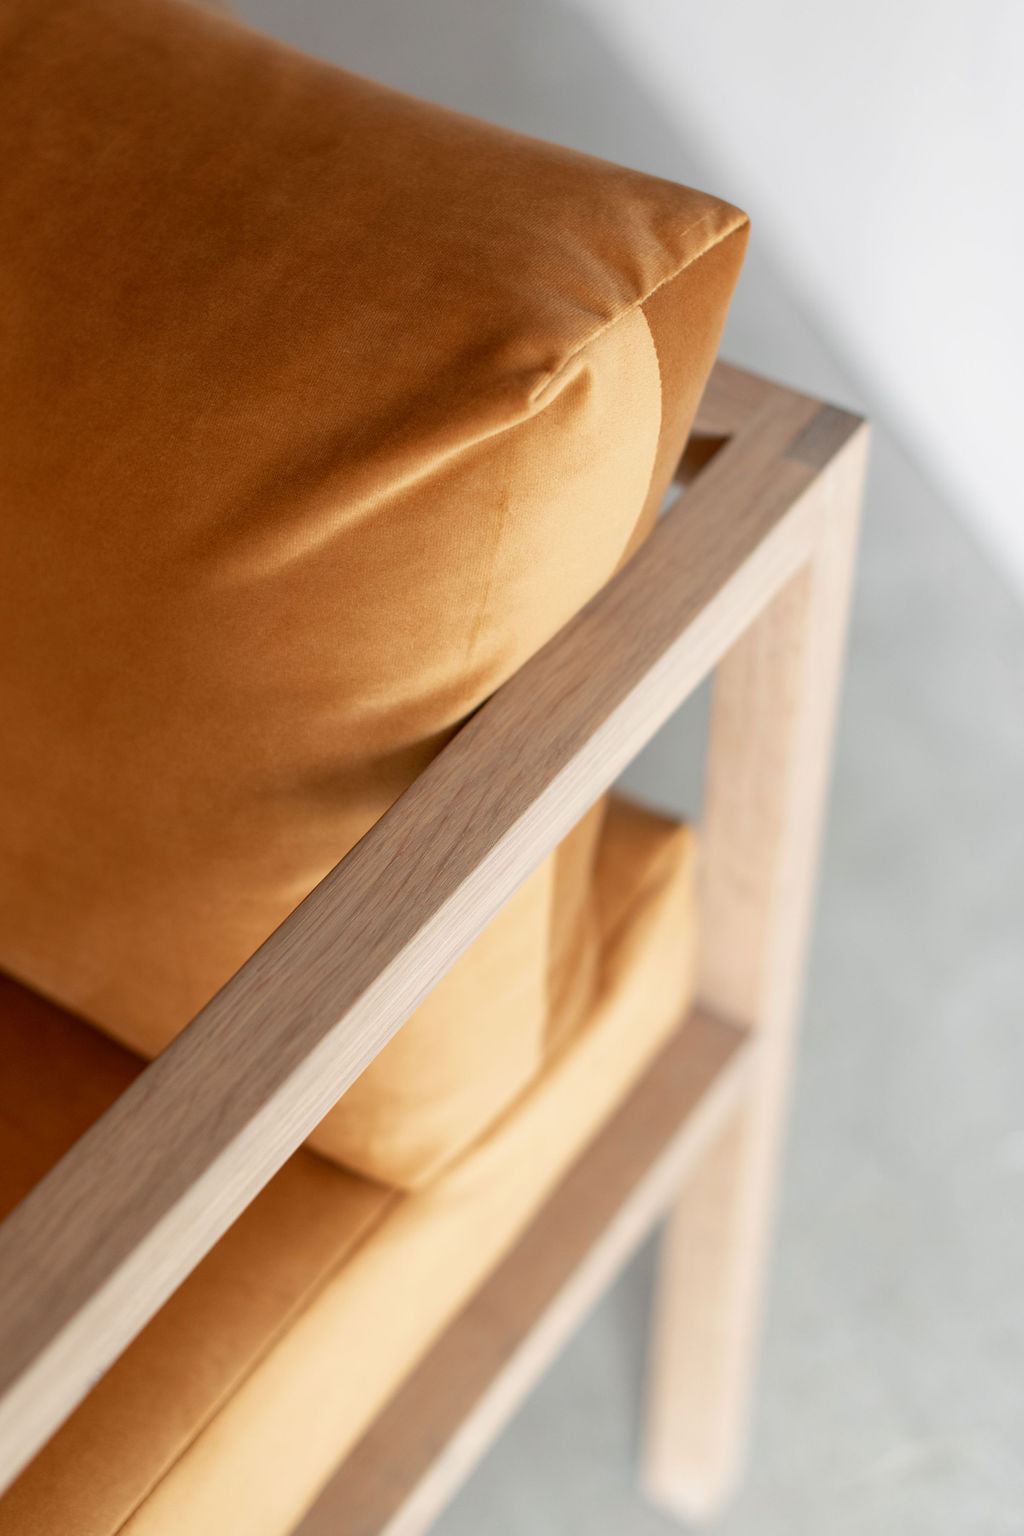 Eve dining chair - wood and cushion close up 